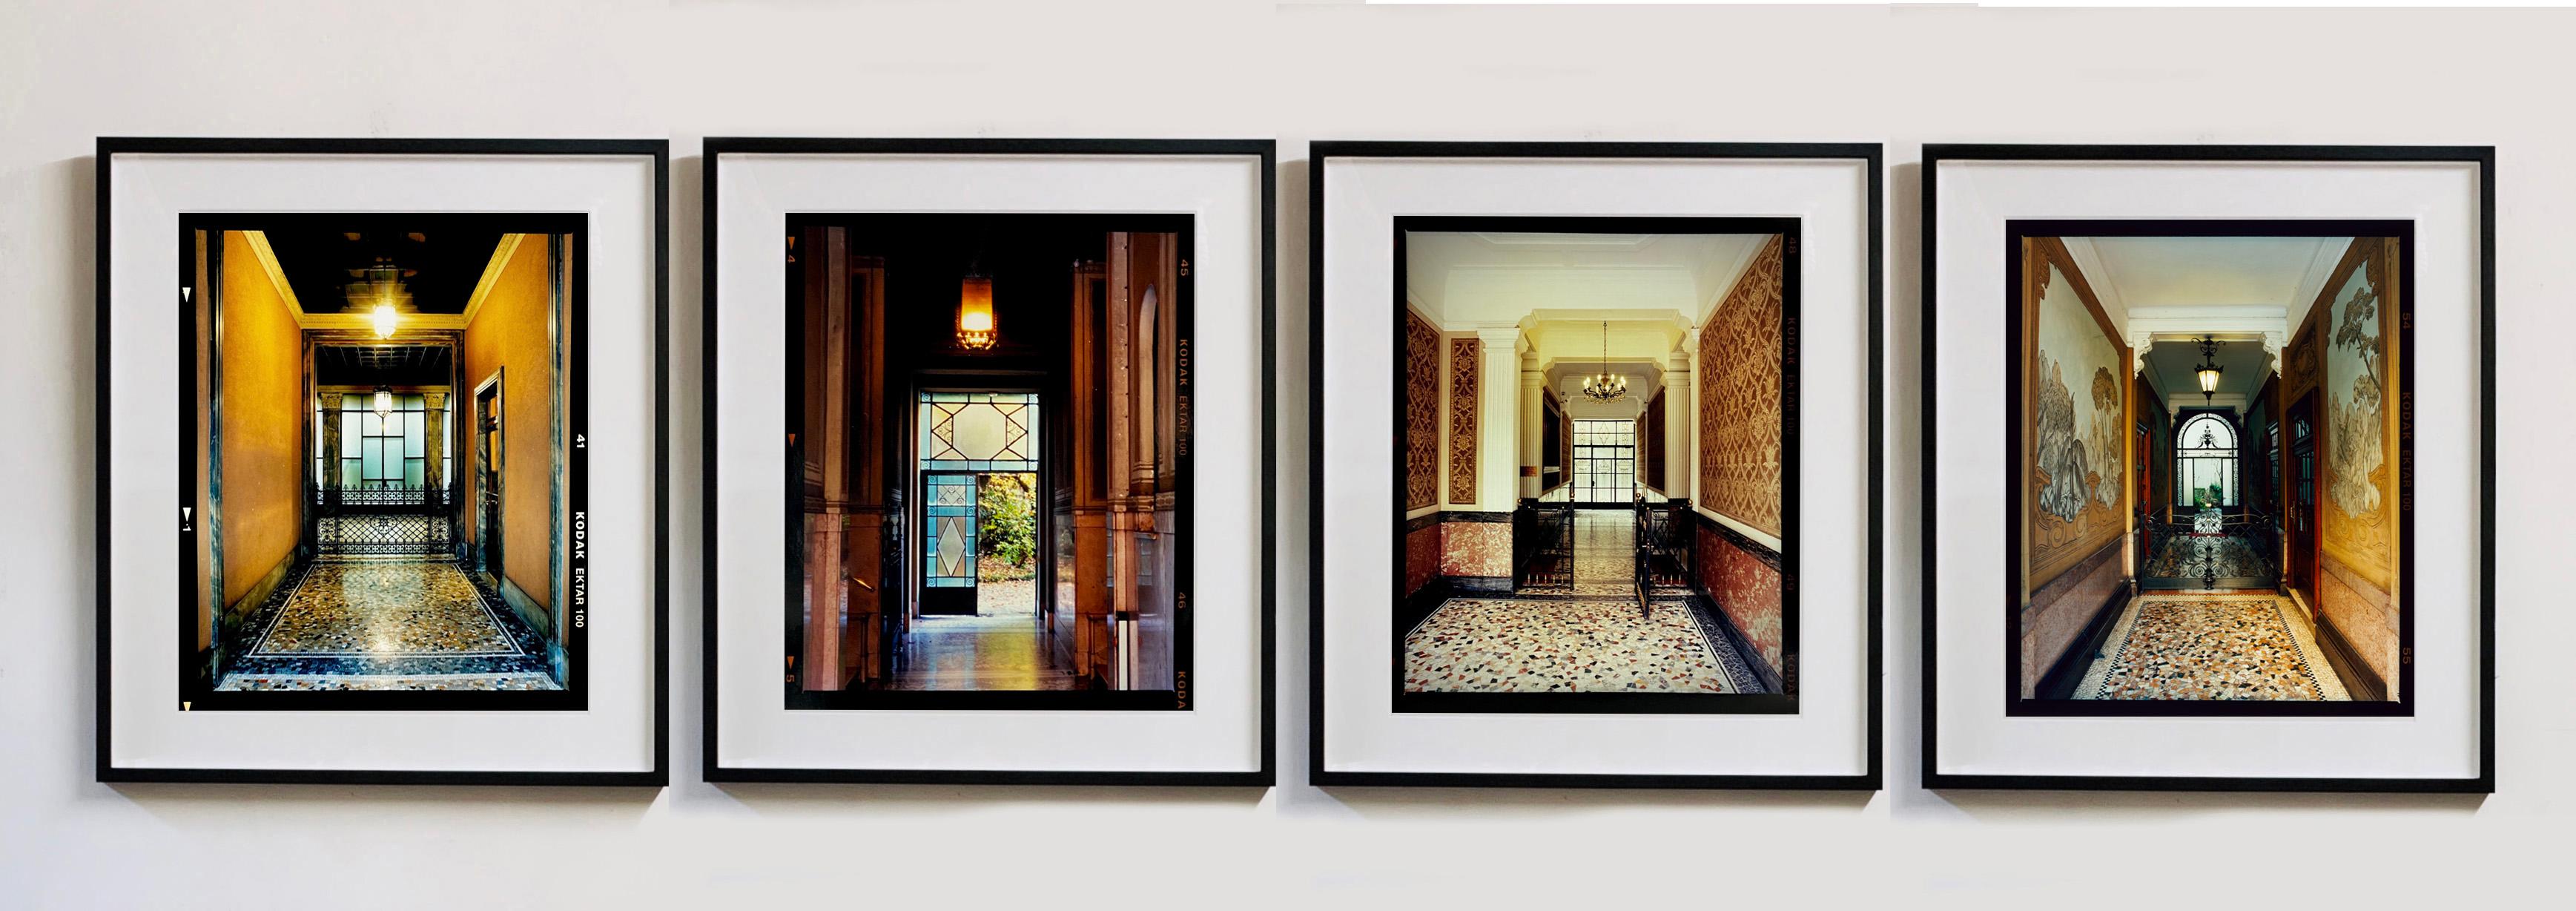 Foyer V, Milan - Italian architectural color photography For Sale 4